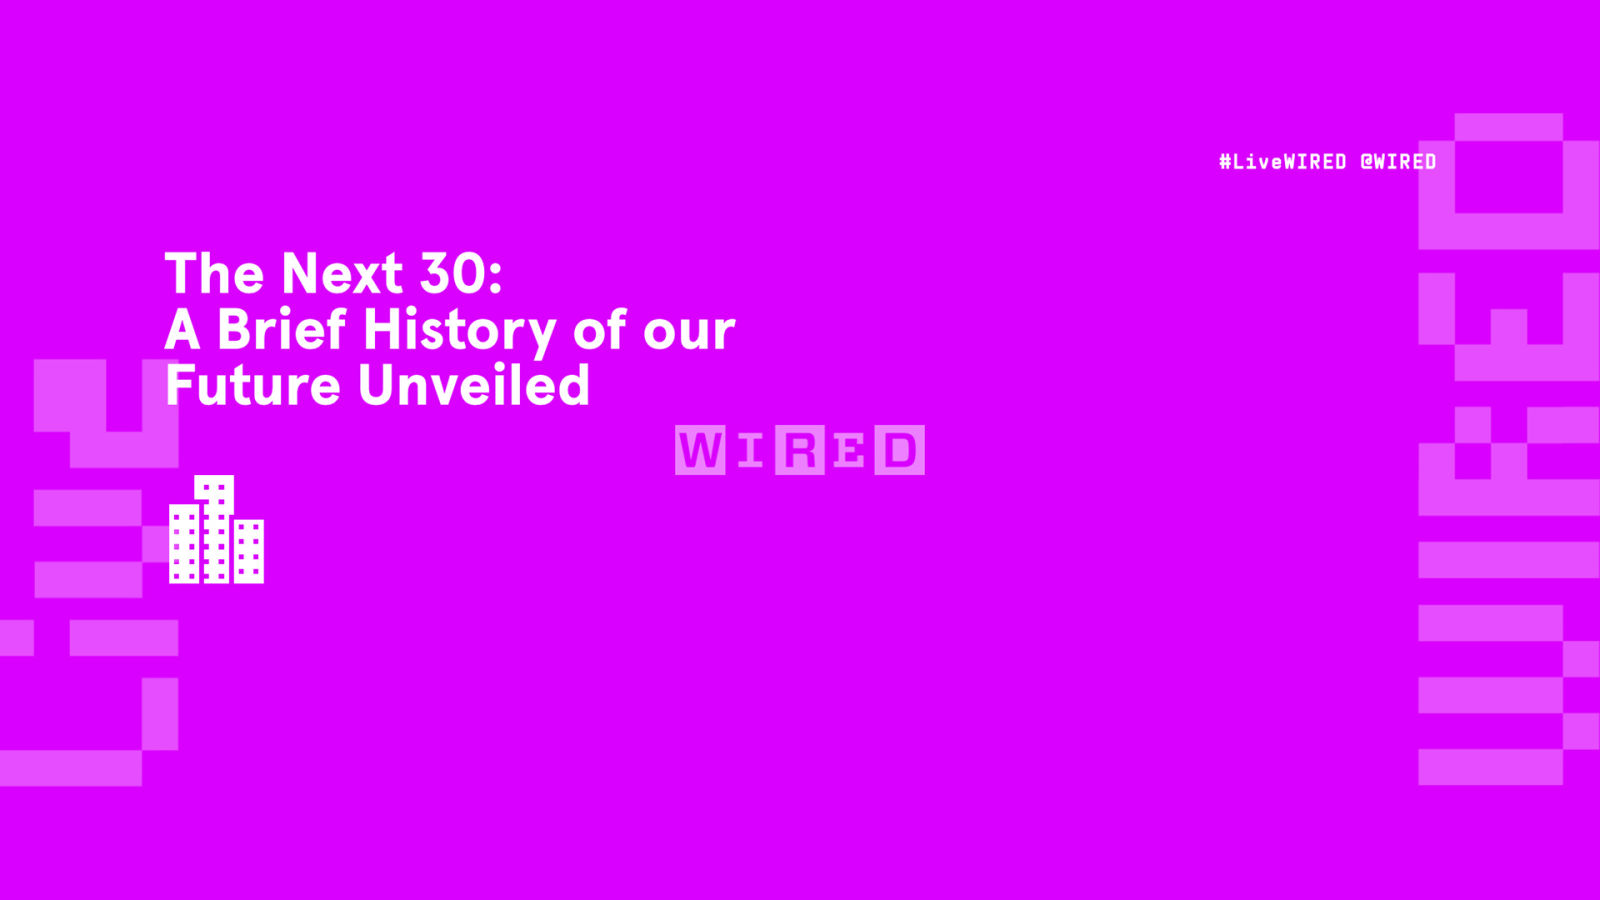 The Next 30: A Brief History of our Future Unveiled